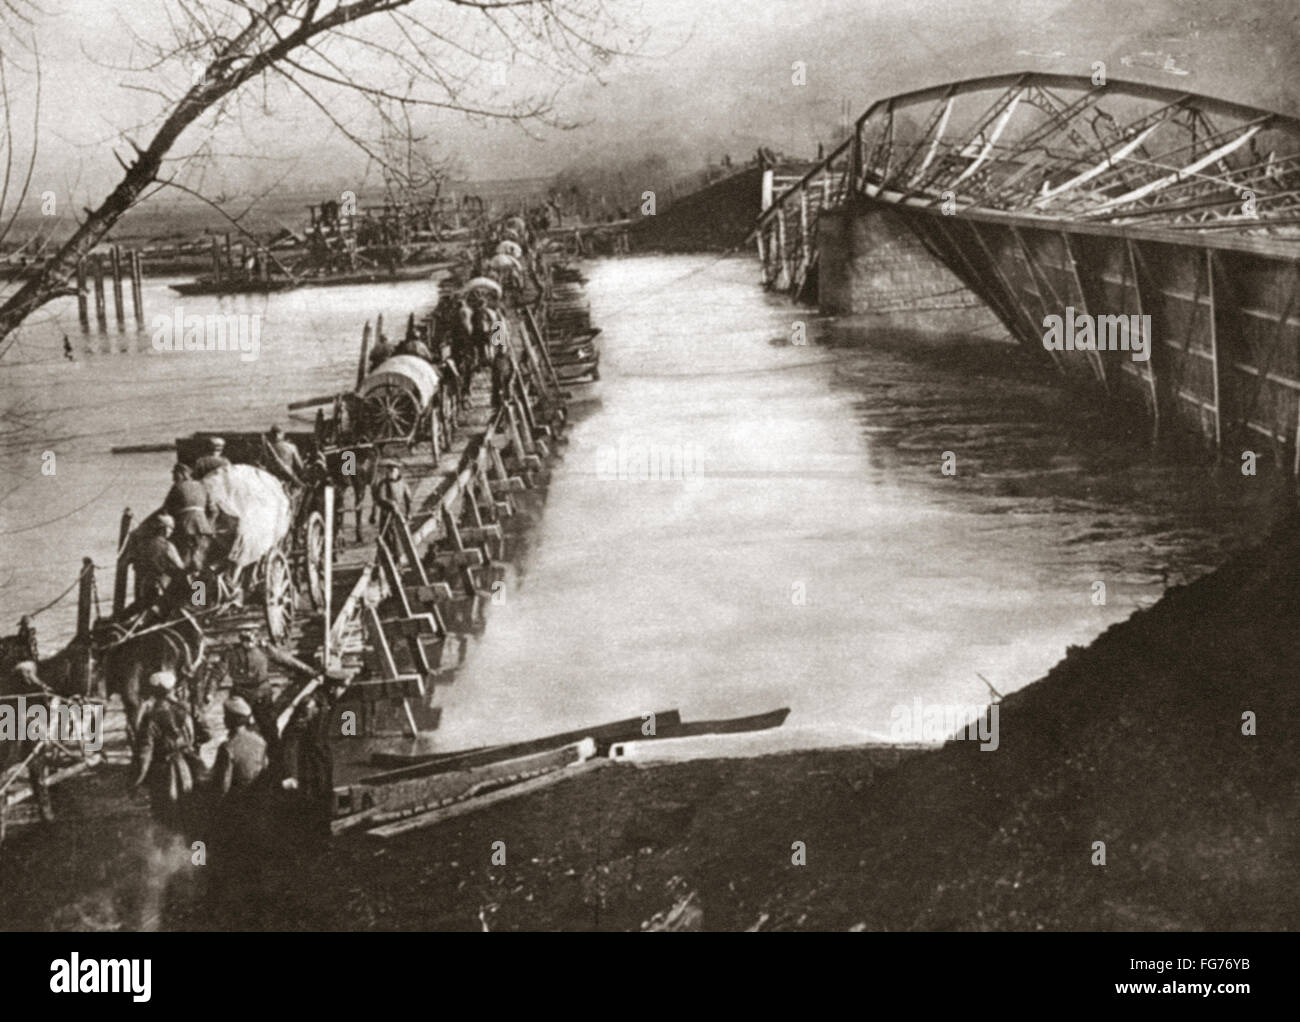 WORLD WAR I: VISTULA RIVER. /nScene on the Vistula River during the Russian retreat bfore Von Mackensen's advance. The Germans are passing over a wooden bridge constructed in place of the destroyed structure, Poland. Photograph, c1916. Stock Photo